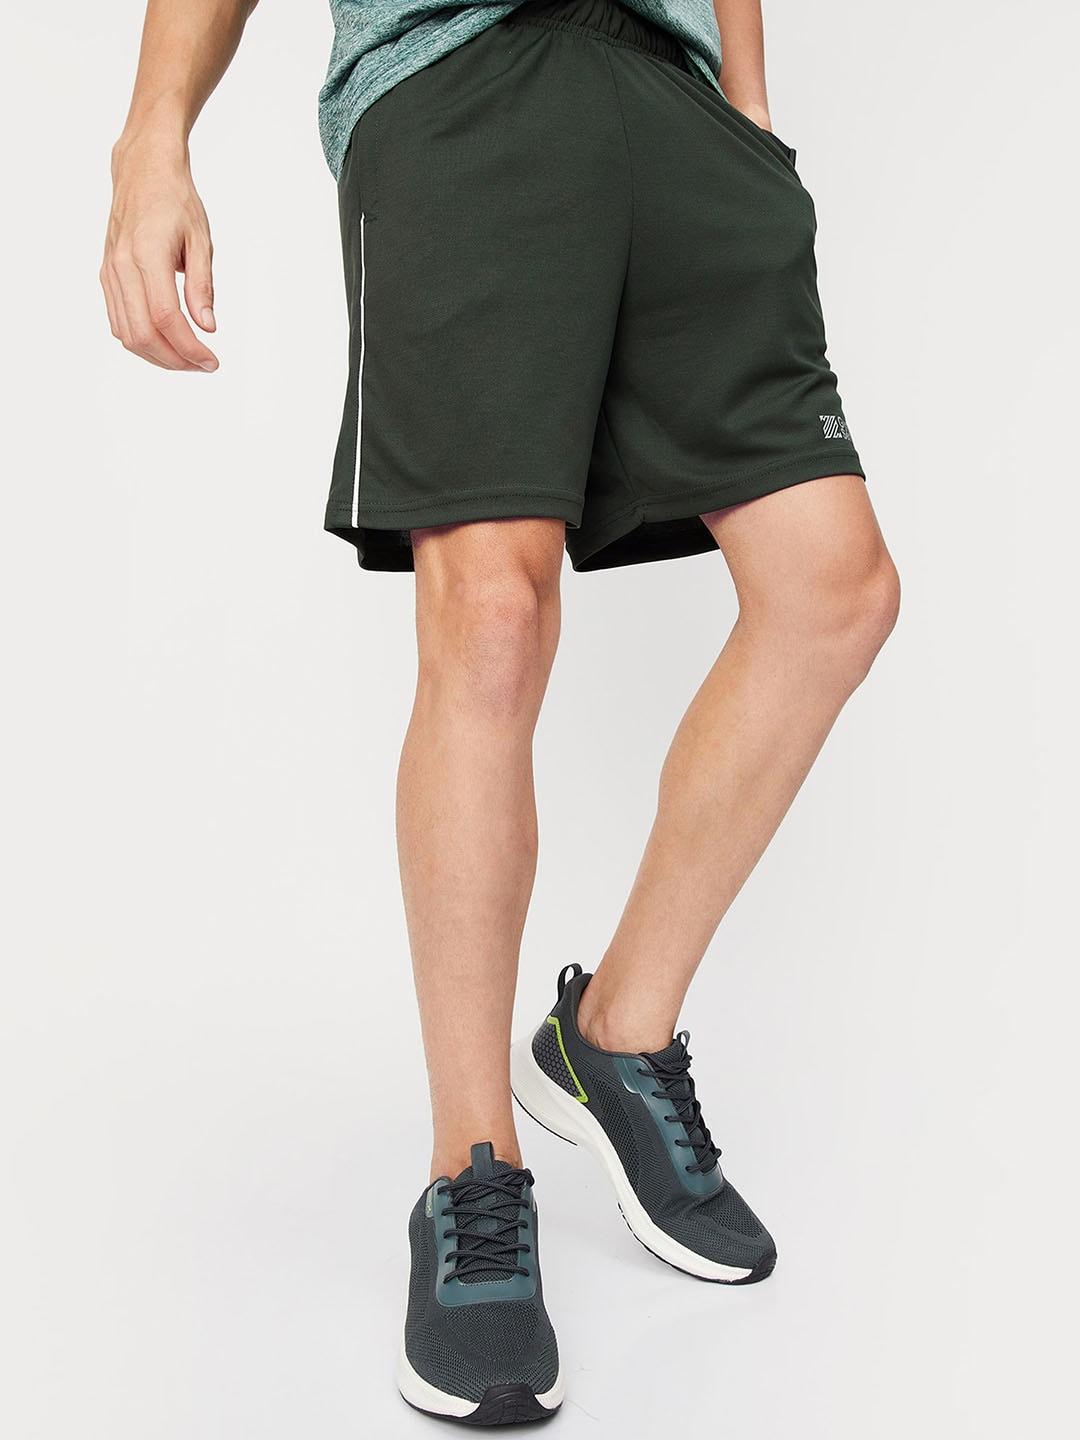 max-men-olive-green-solid-sports-shorts